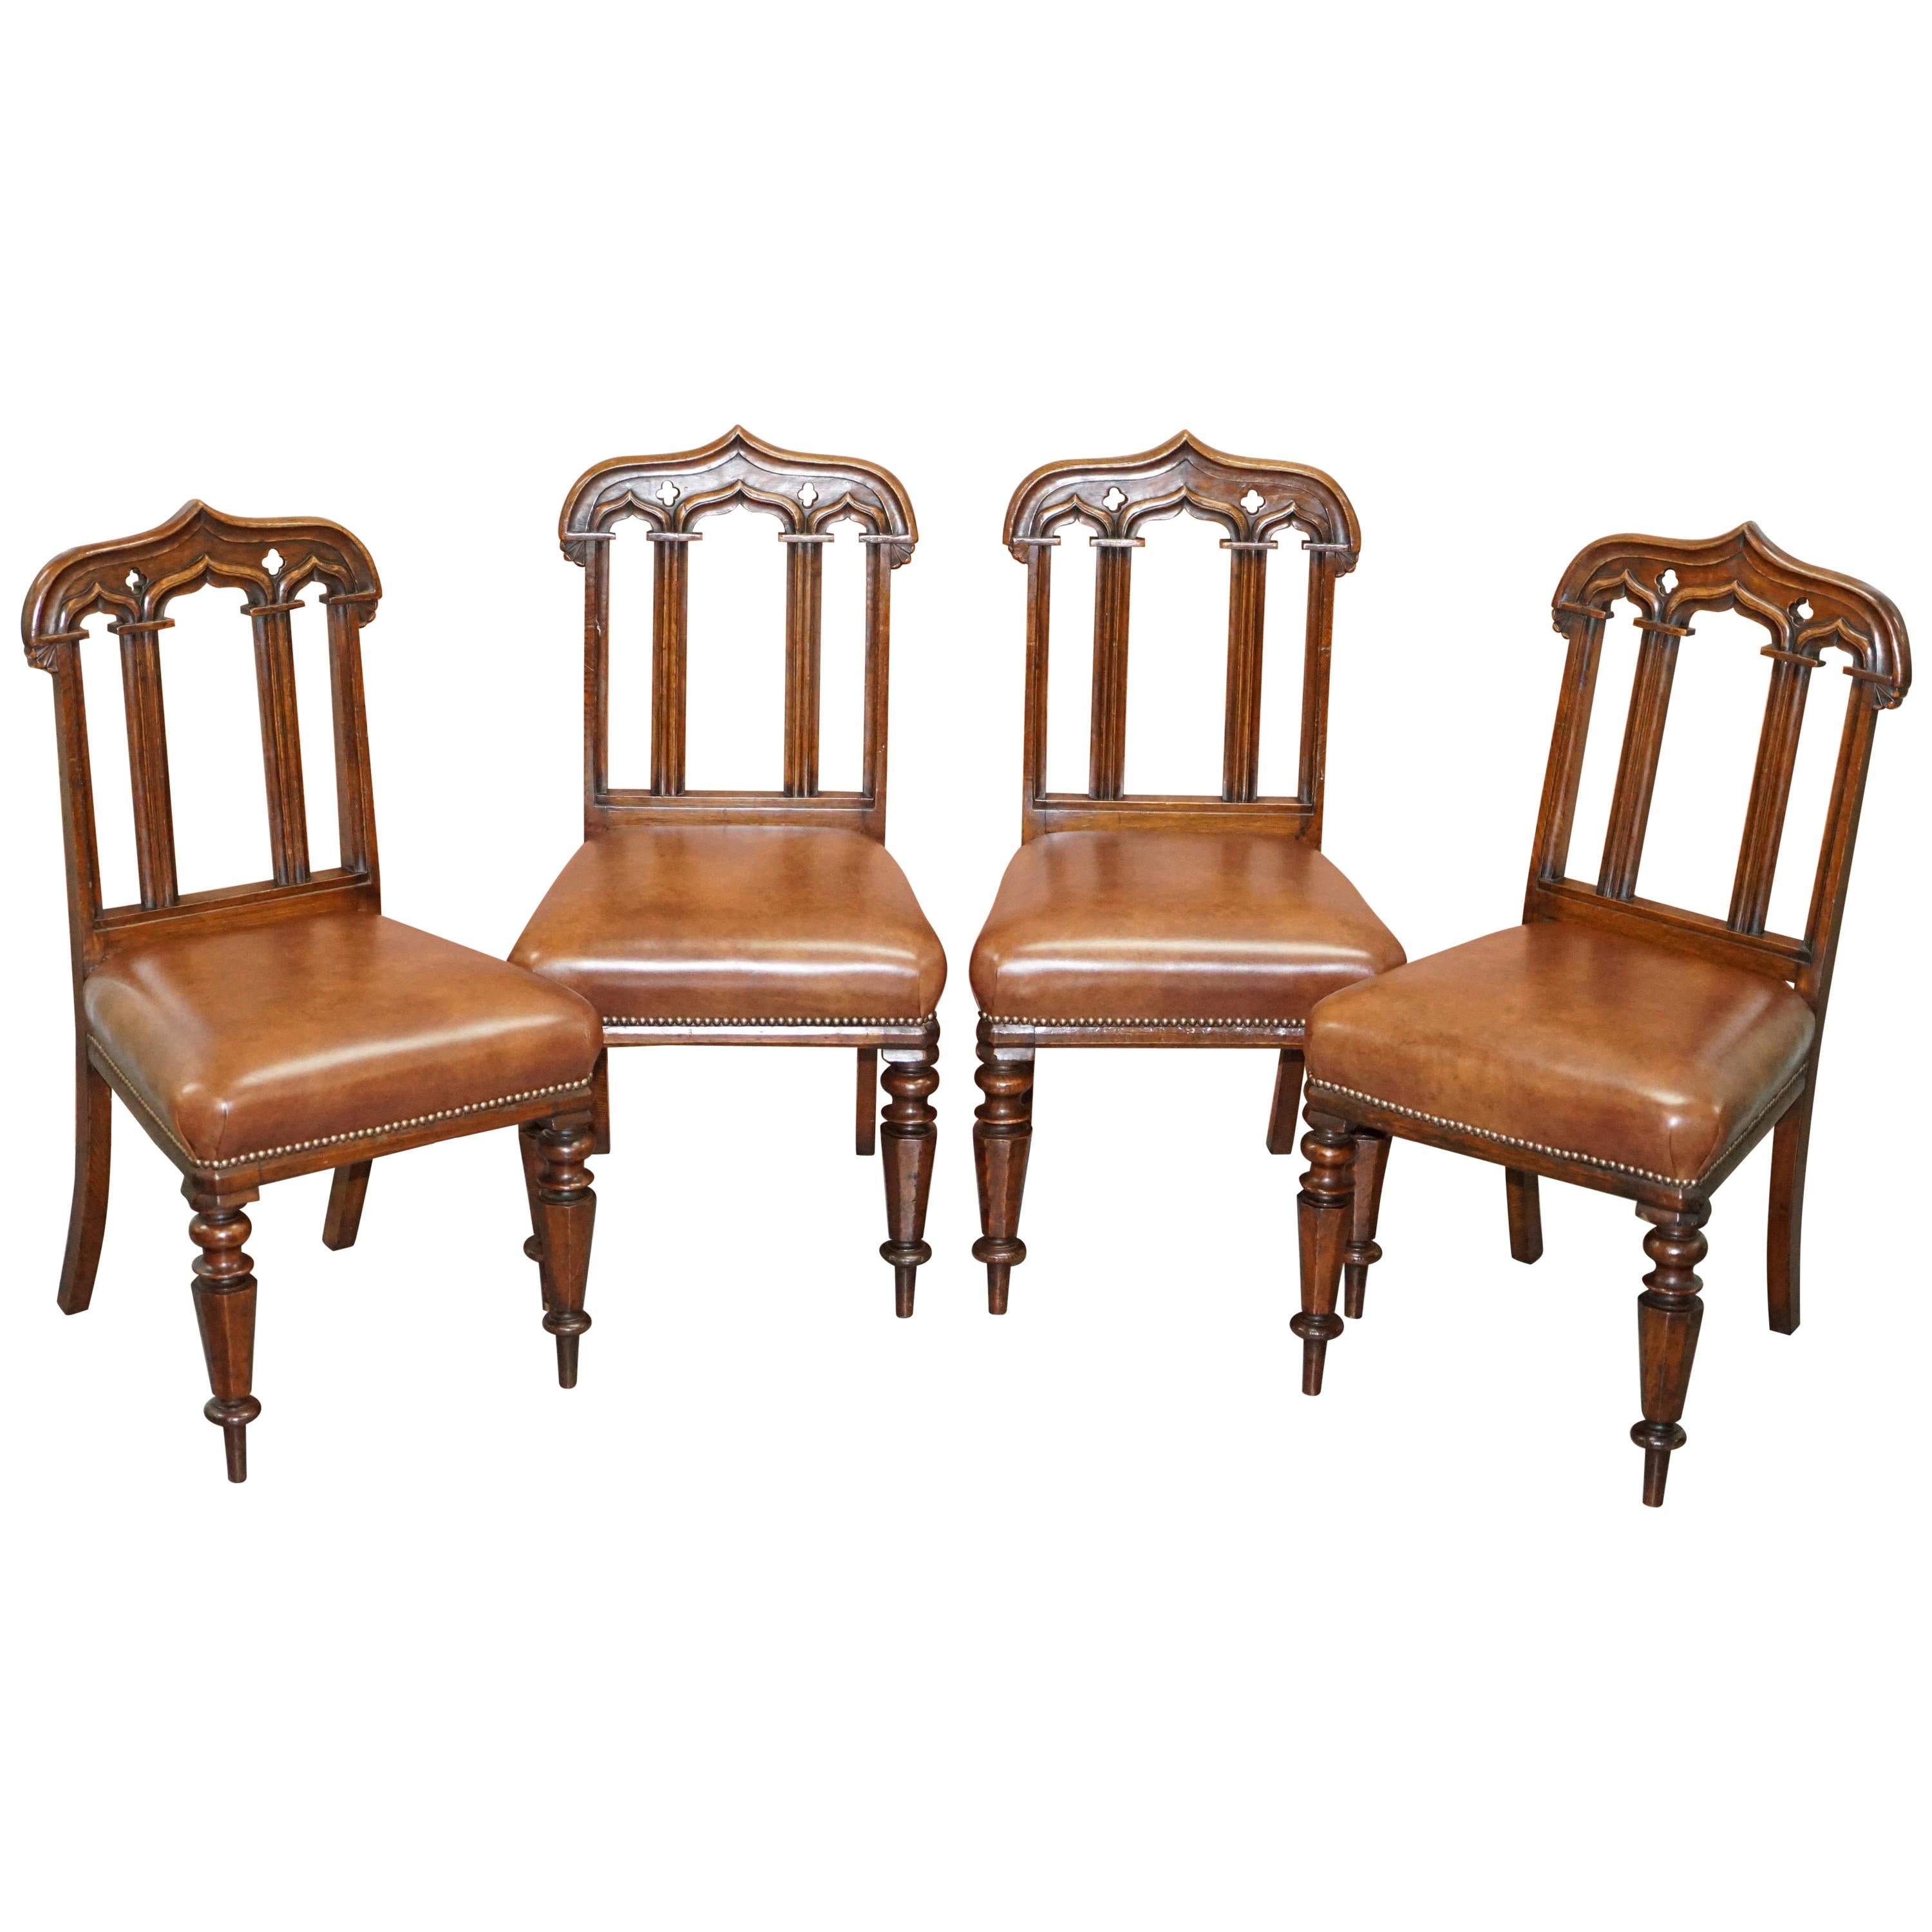 Four circa 1850 T H Filmer & Sons Antique Victorian Brown Leather Dining Chairs